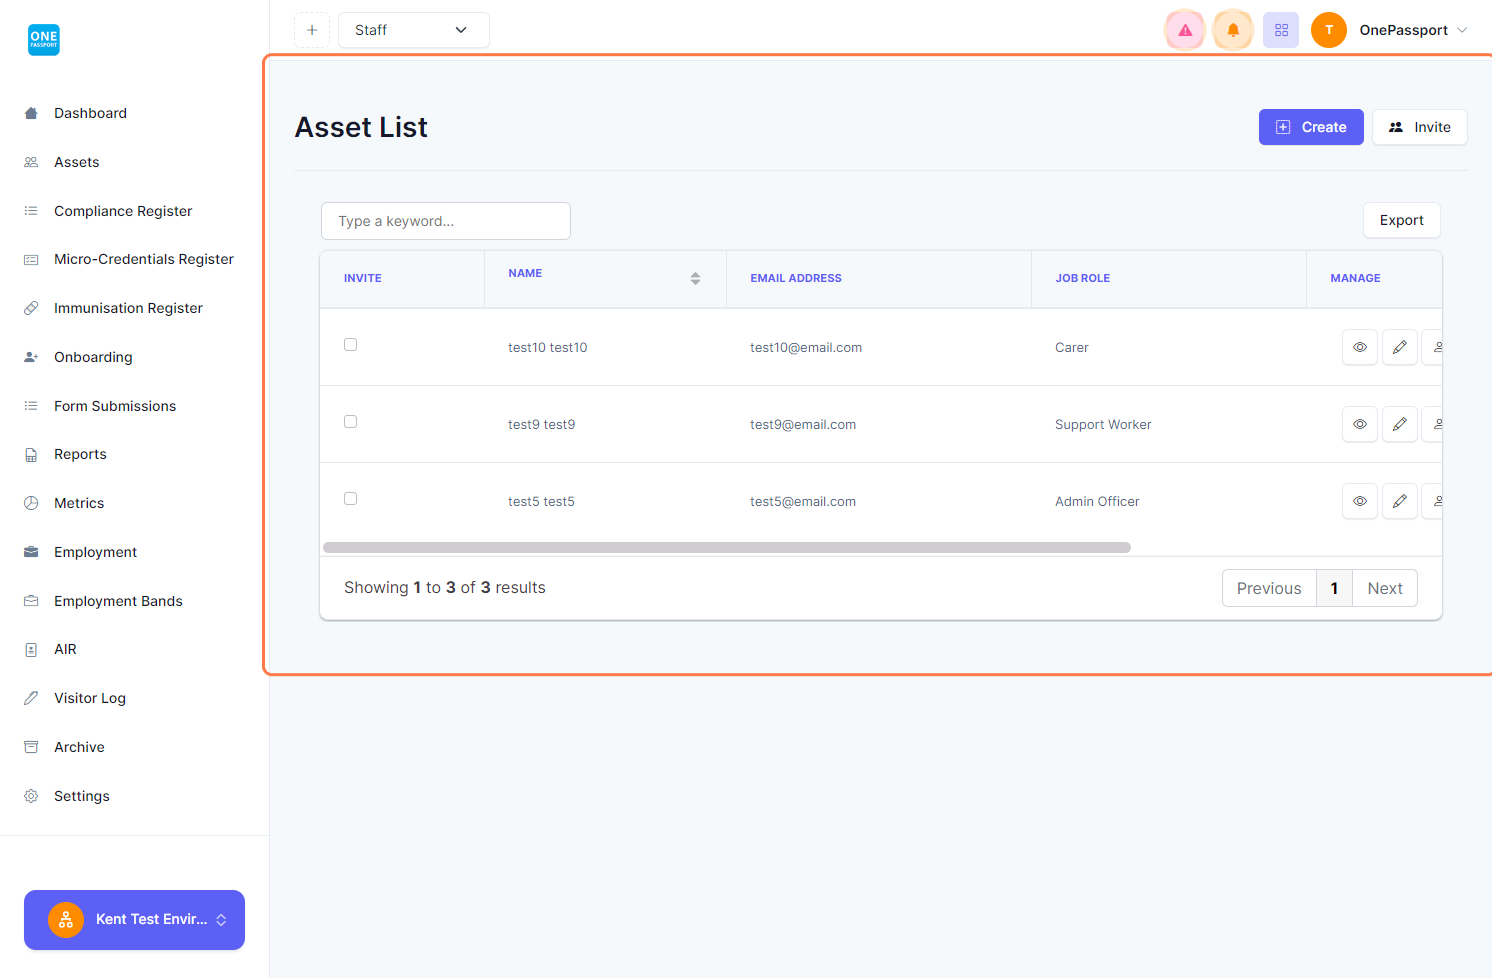 On the Asset List, search or select the name of the Asset/Worker you wish to edit information from the list.